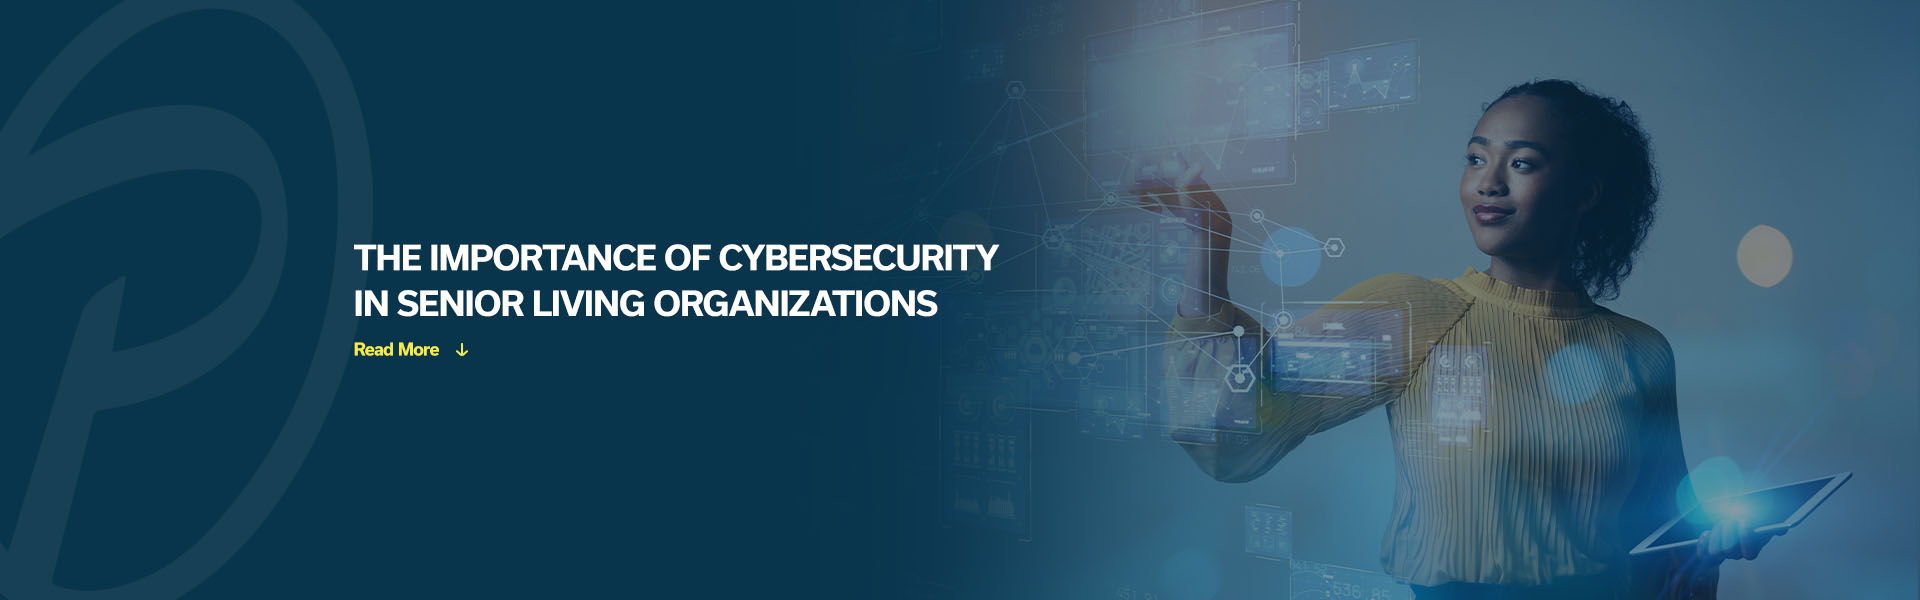 012-the-importance-of-cybersecurity-in-senior-living-organizations